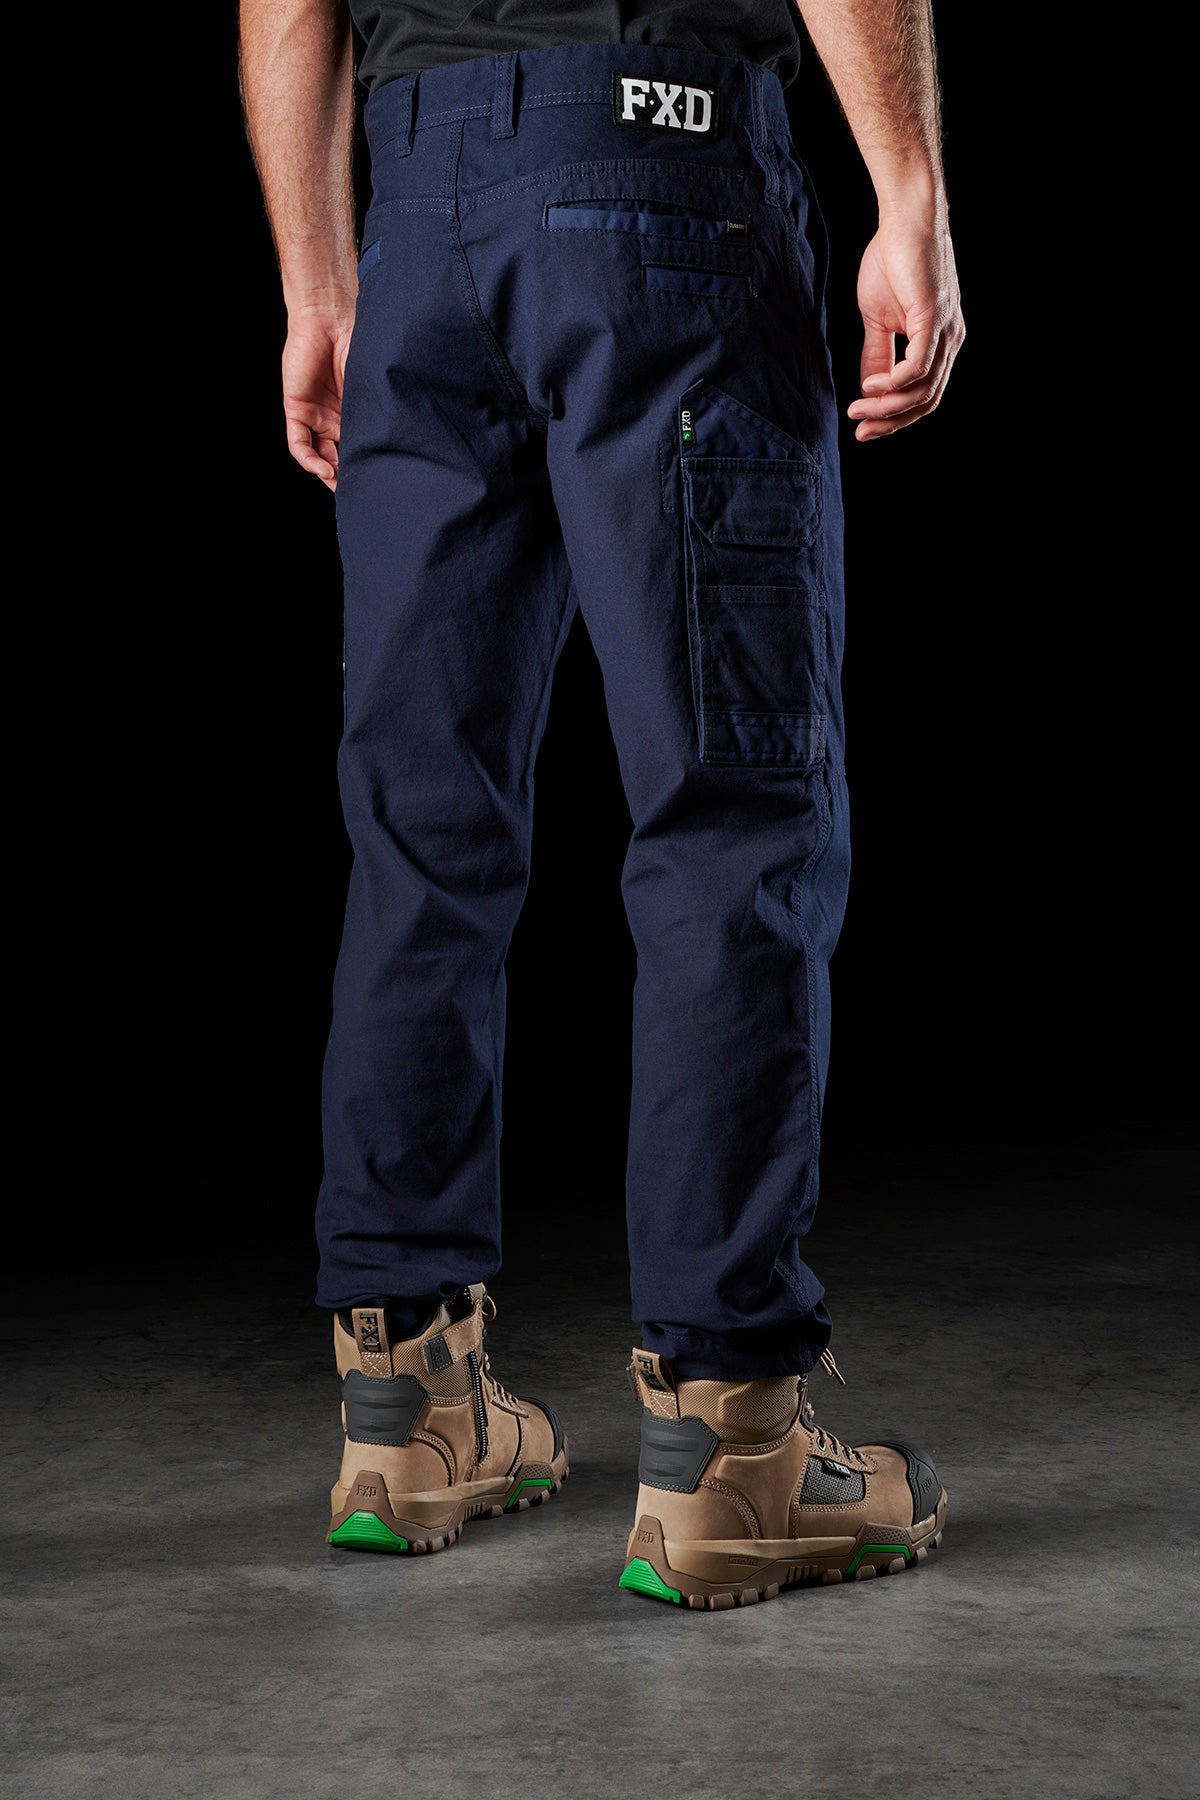 Fxd Wp-3 Stretch Work Pants — The Workwear Shed